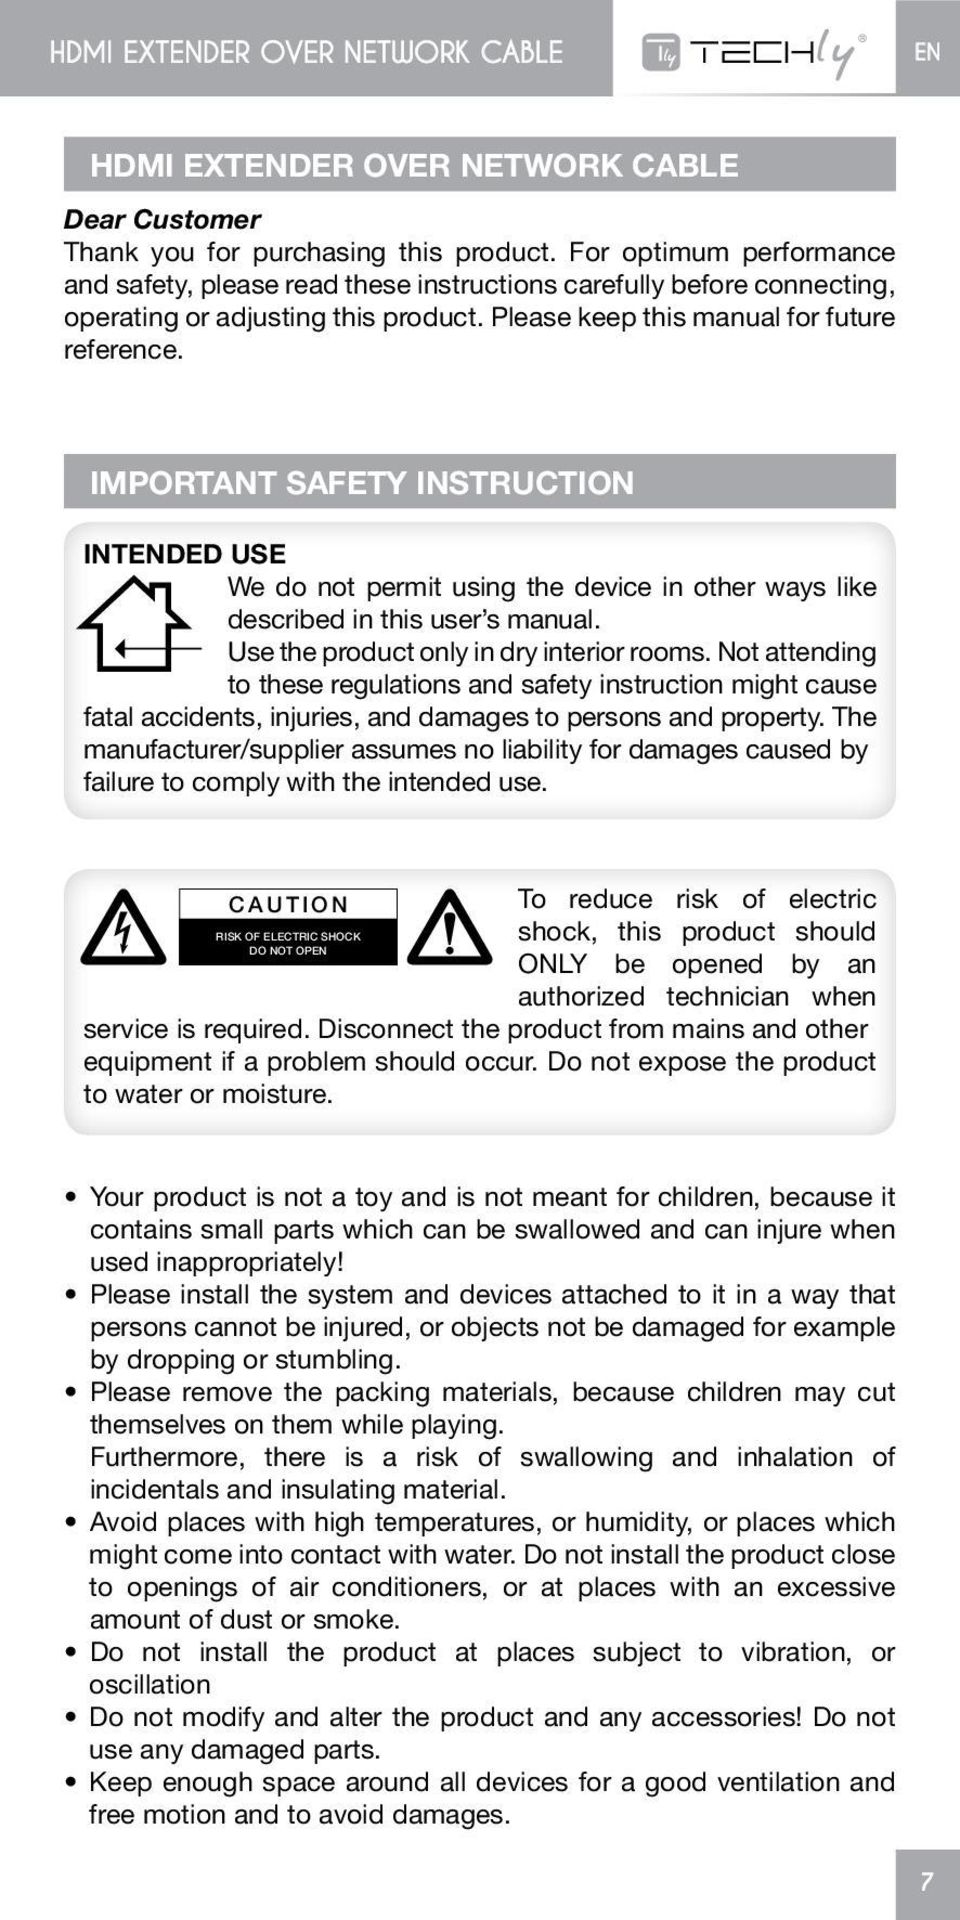 IMPORTANT SAFETY INSTRUCTION INTENDED USE We do not permit using the device in other ways like described in this user s manual. Use the product only in dry interior rooms.